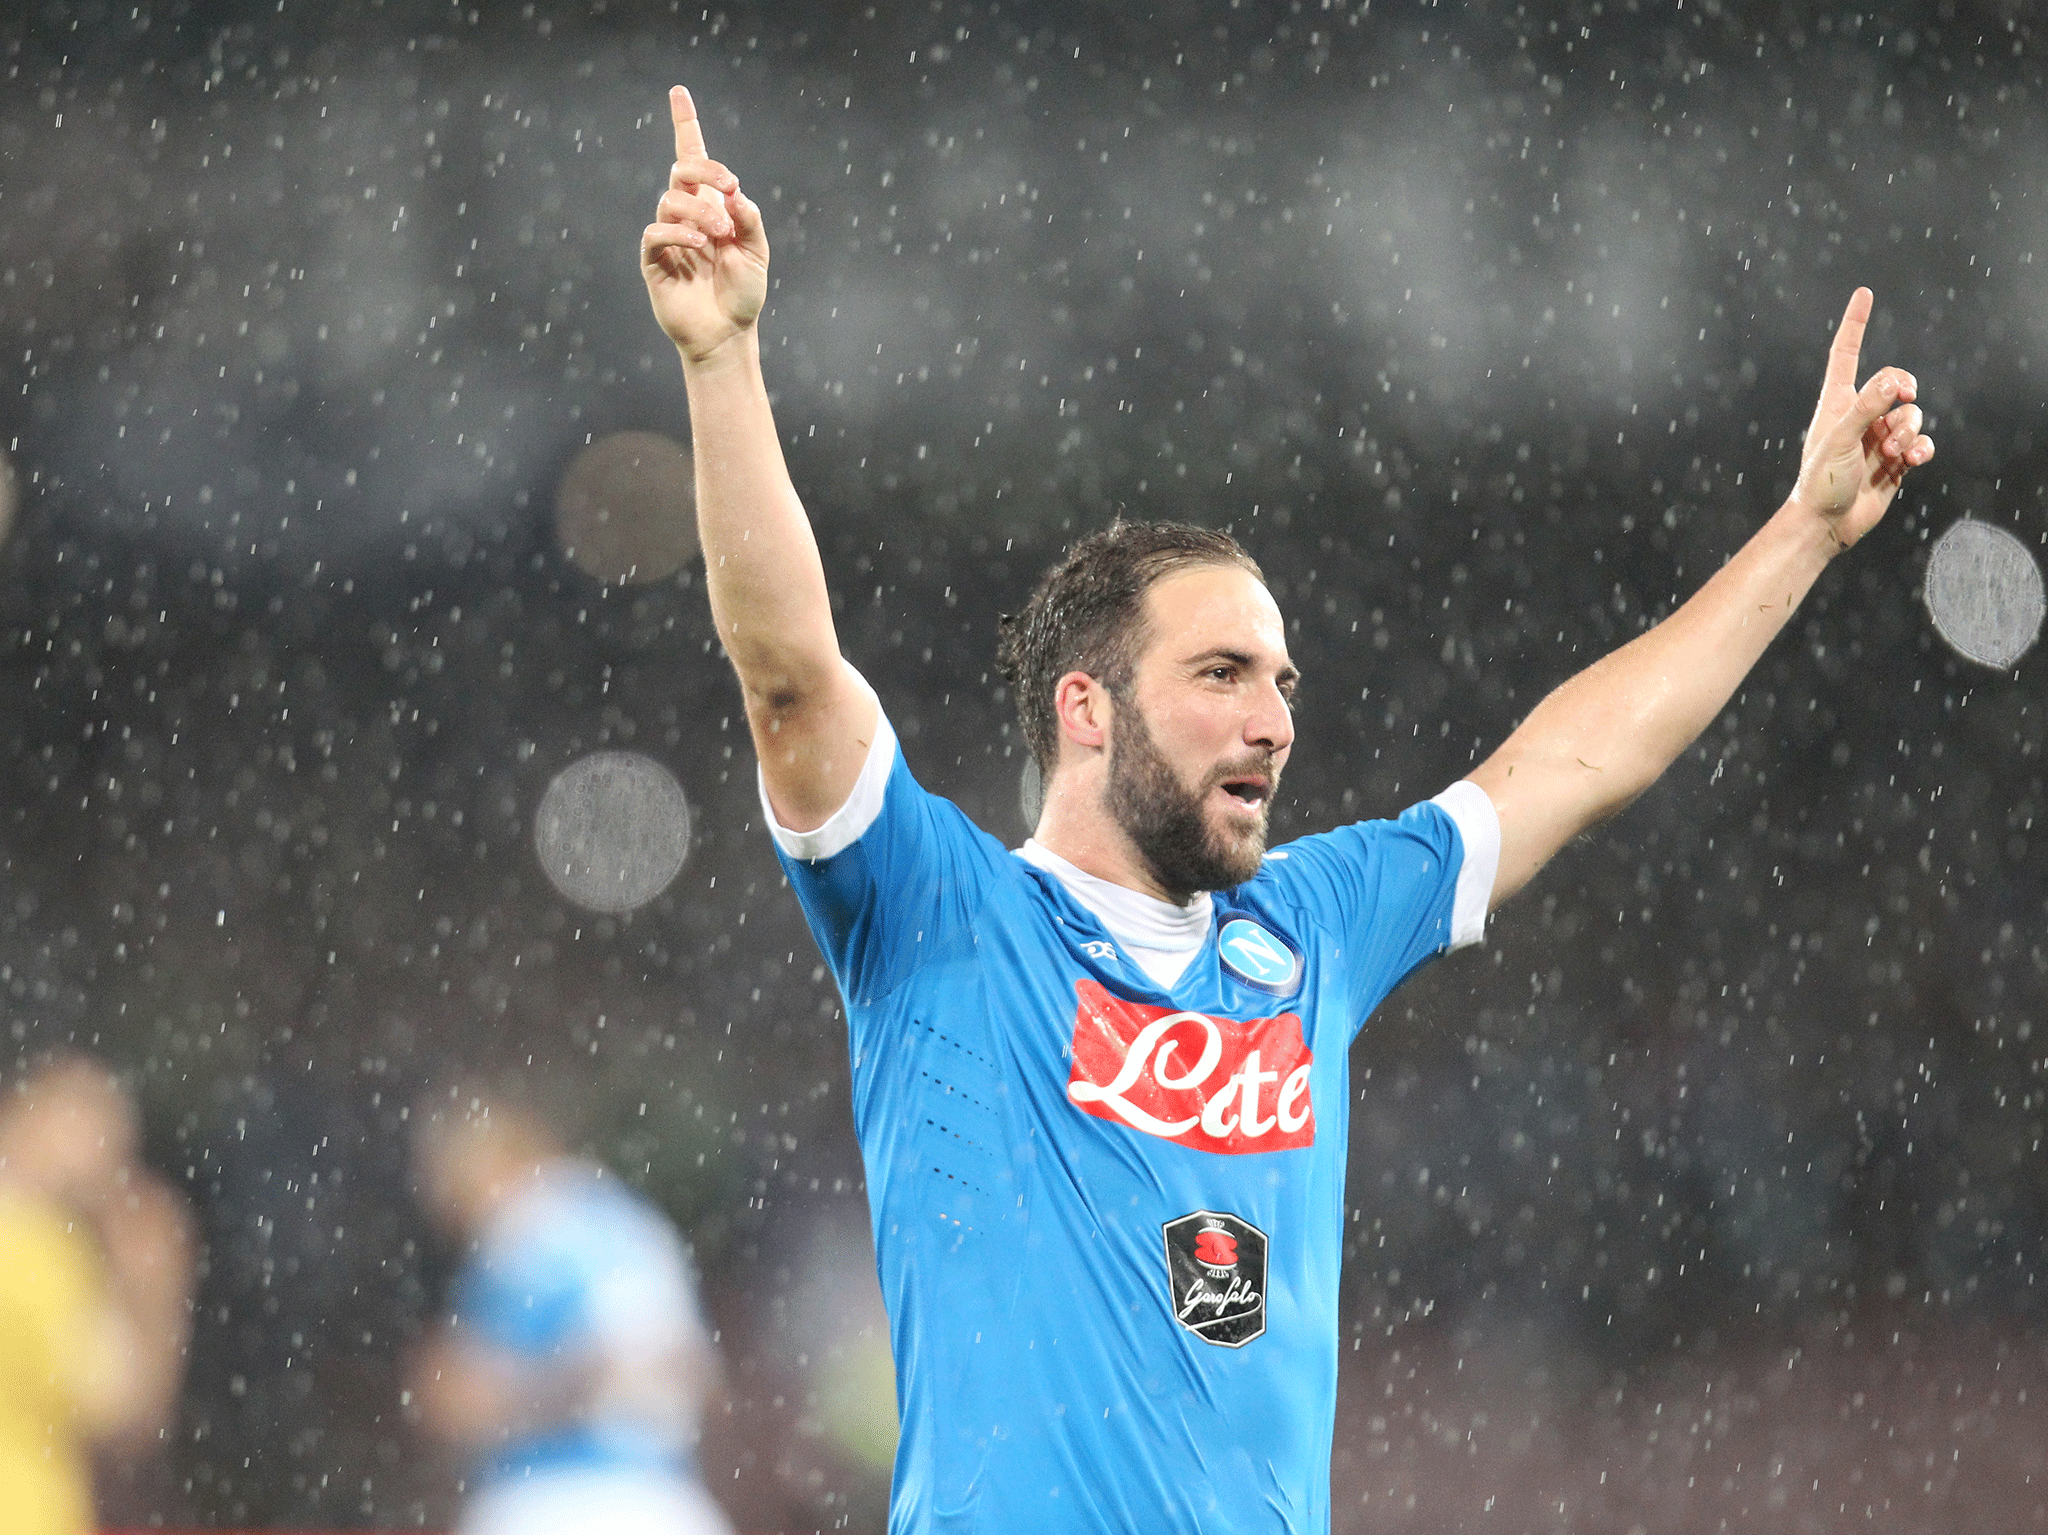 Higuain is expected to finalise his move to Juventus soon following a stellar season with Napoli